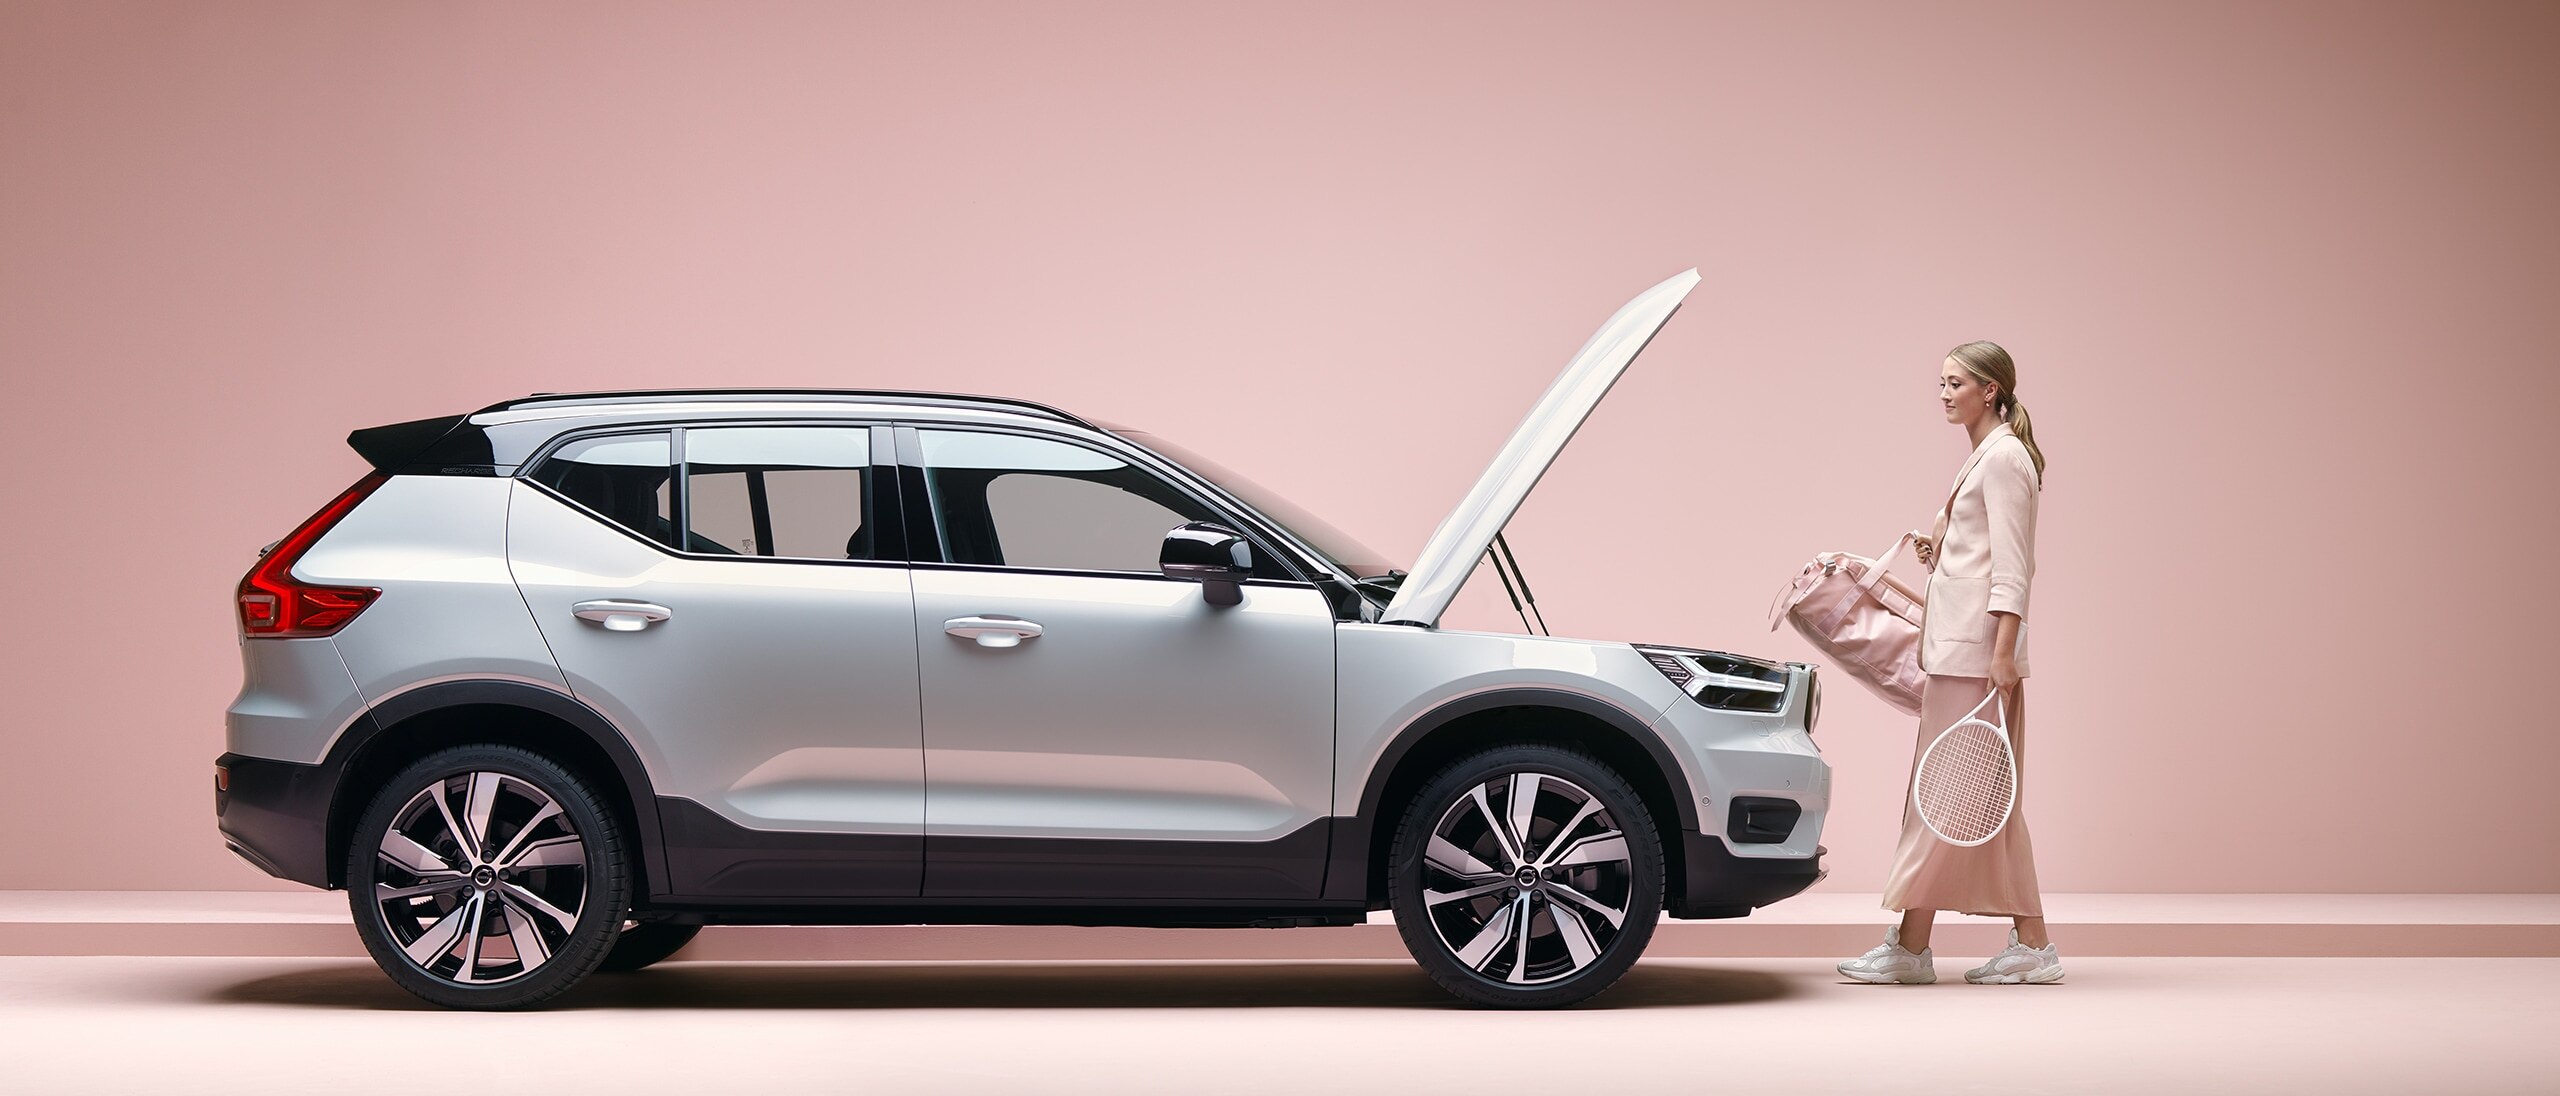 Volvo XC40 Recharge electric compact SUV to be launched in mid 2021